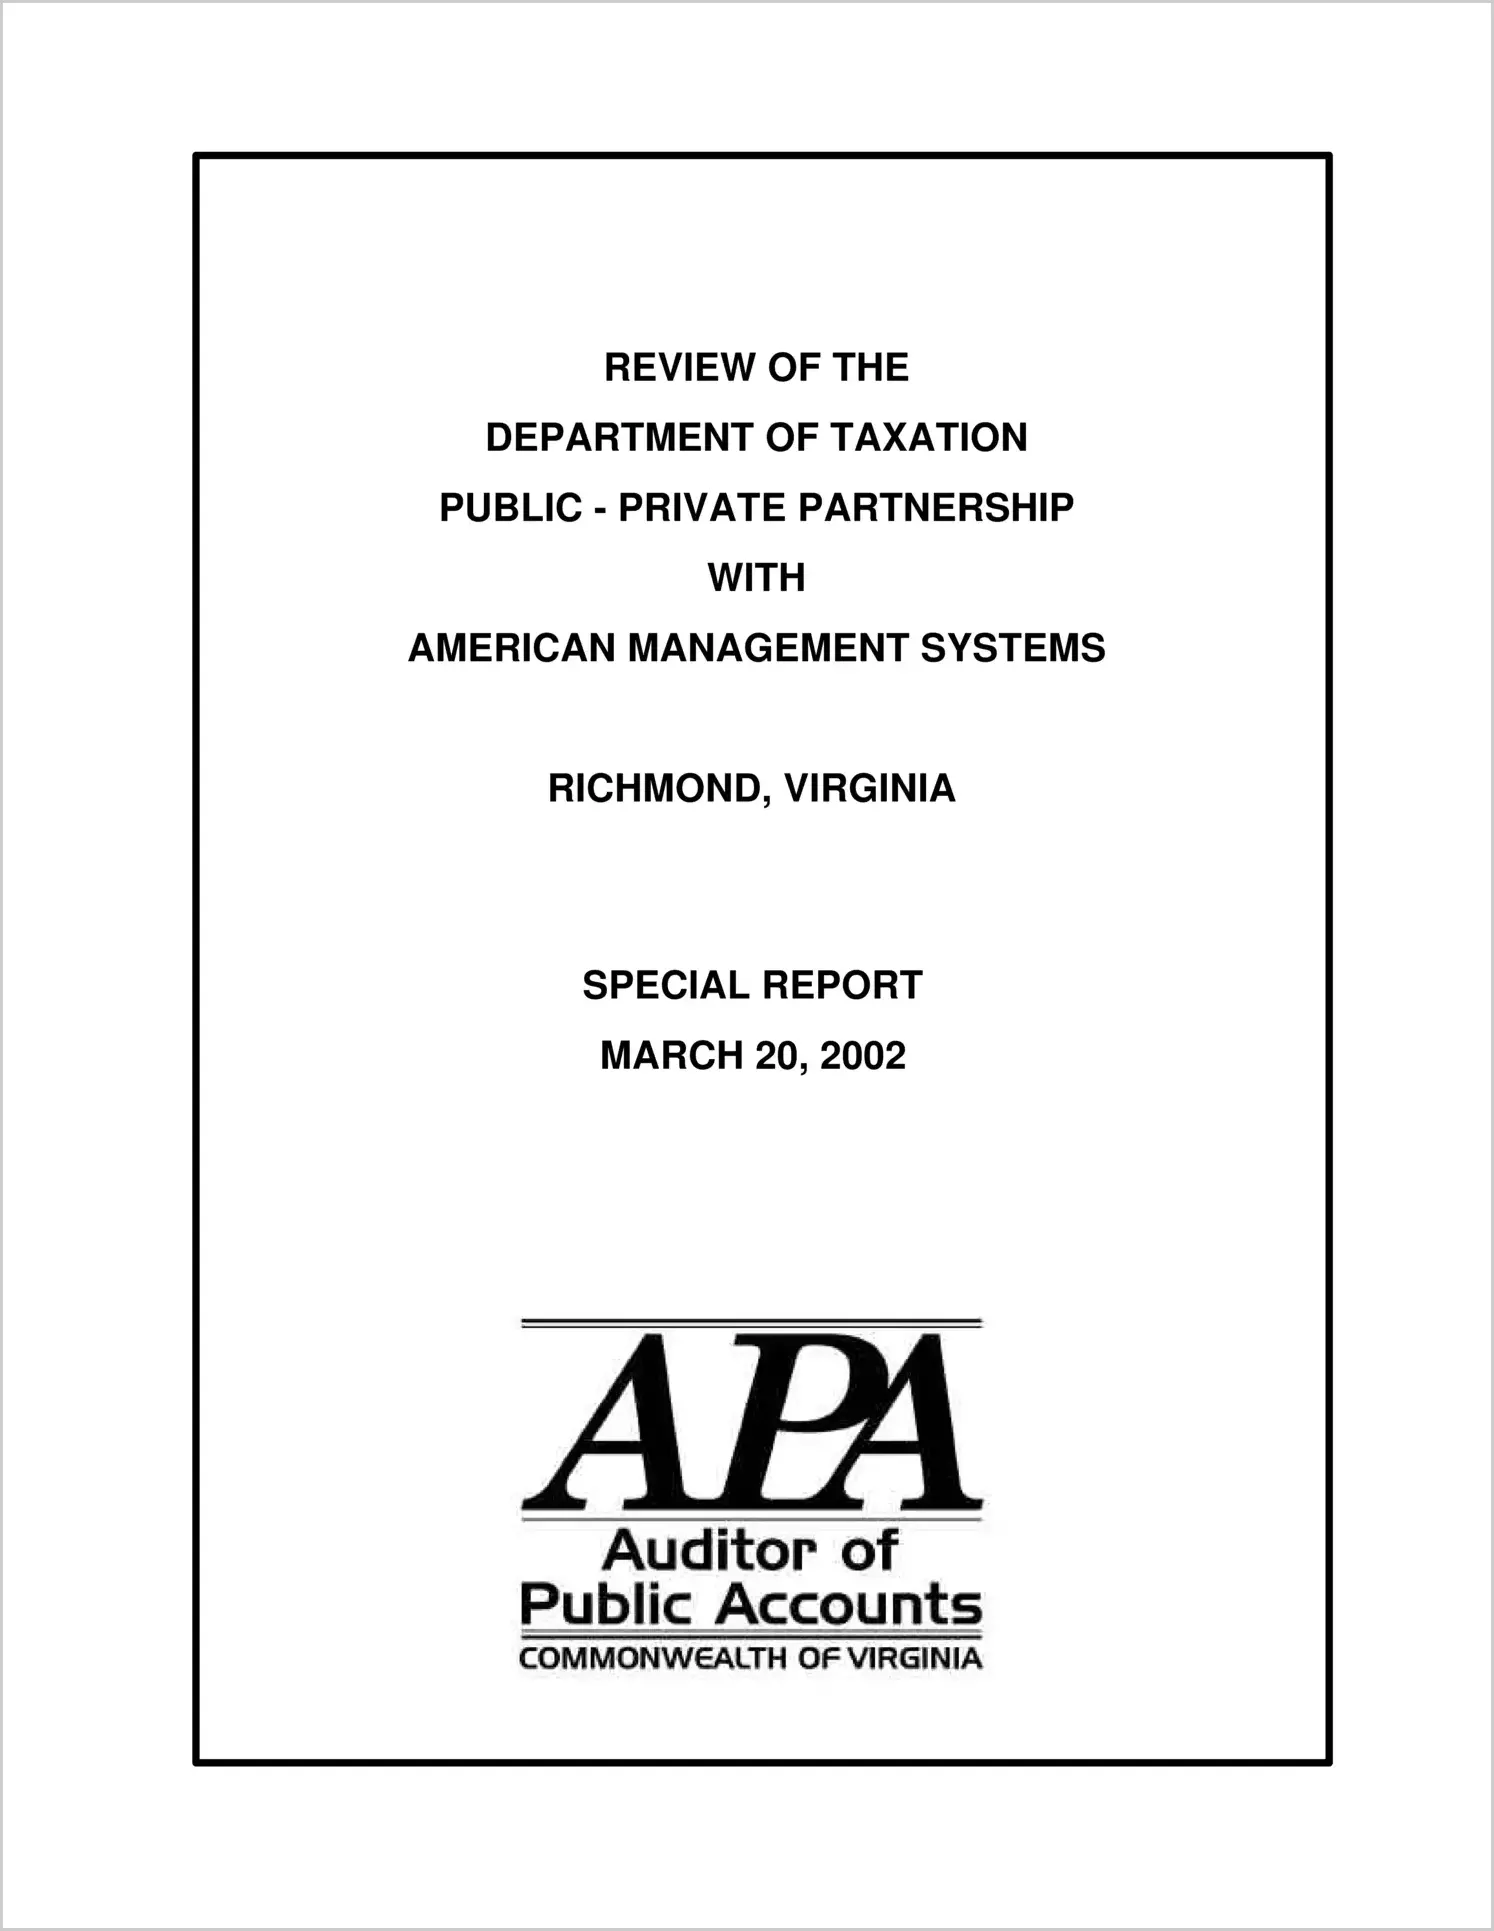 Review of the Department of Taxation Public-Private Parnership with American Management Systems